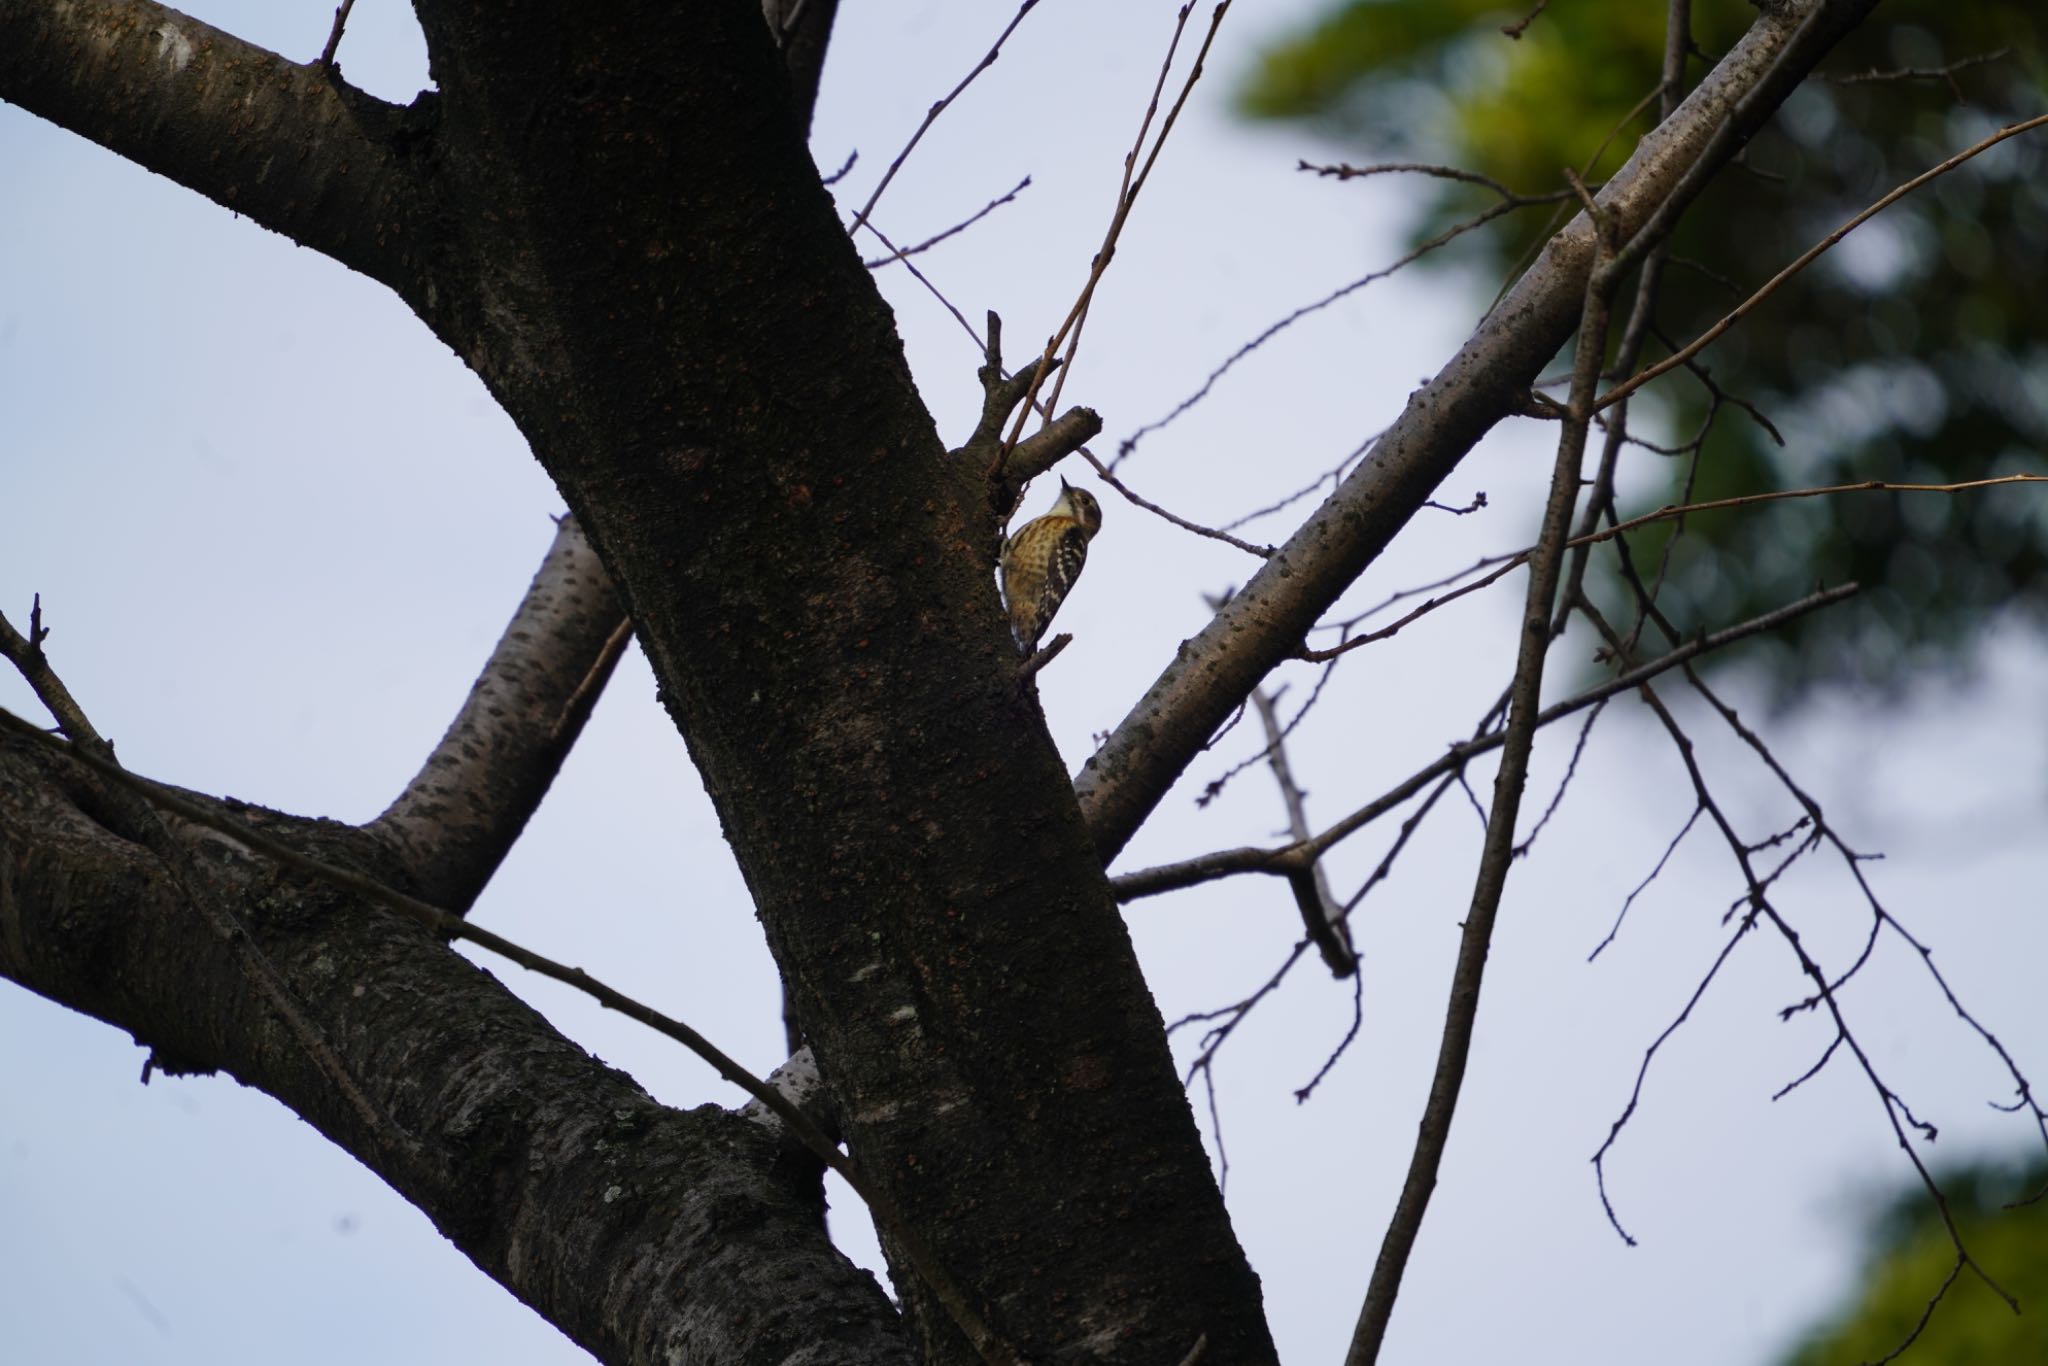 Photo of Japanese Pygmy Woodpecker at 夜宮公園 by アカウント8649